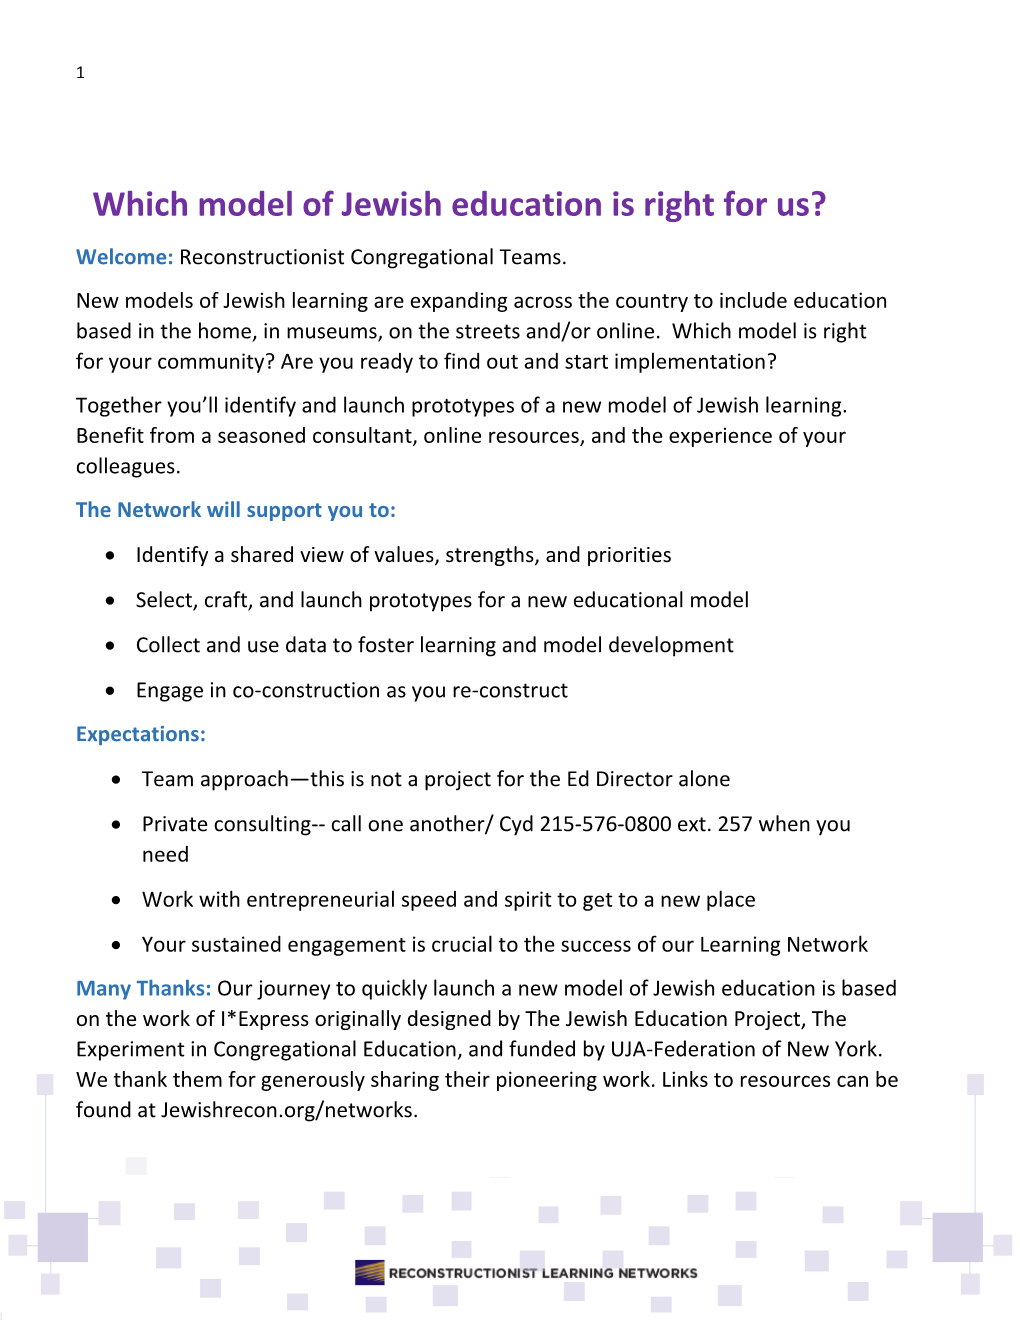 Which Model of Jewish Education Is Right for Us?